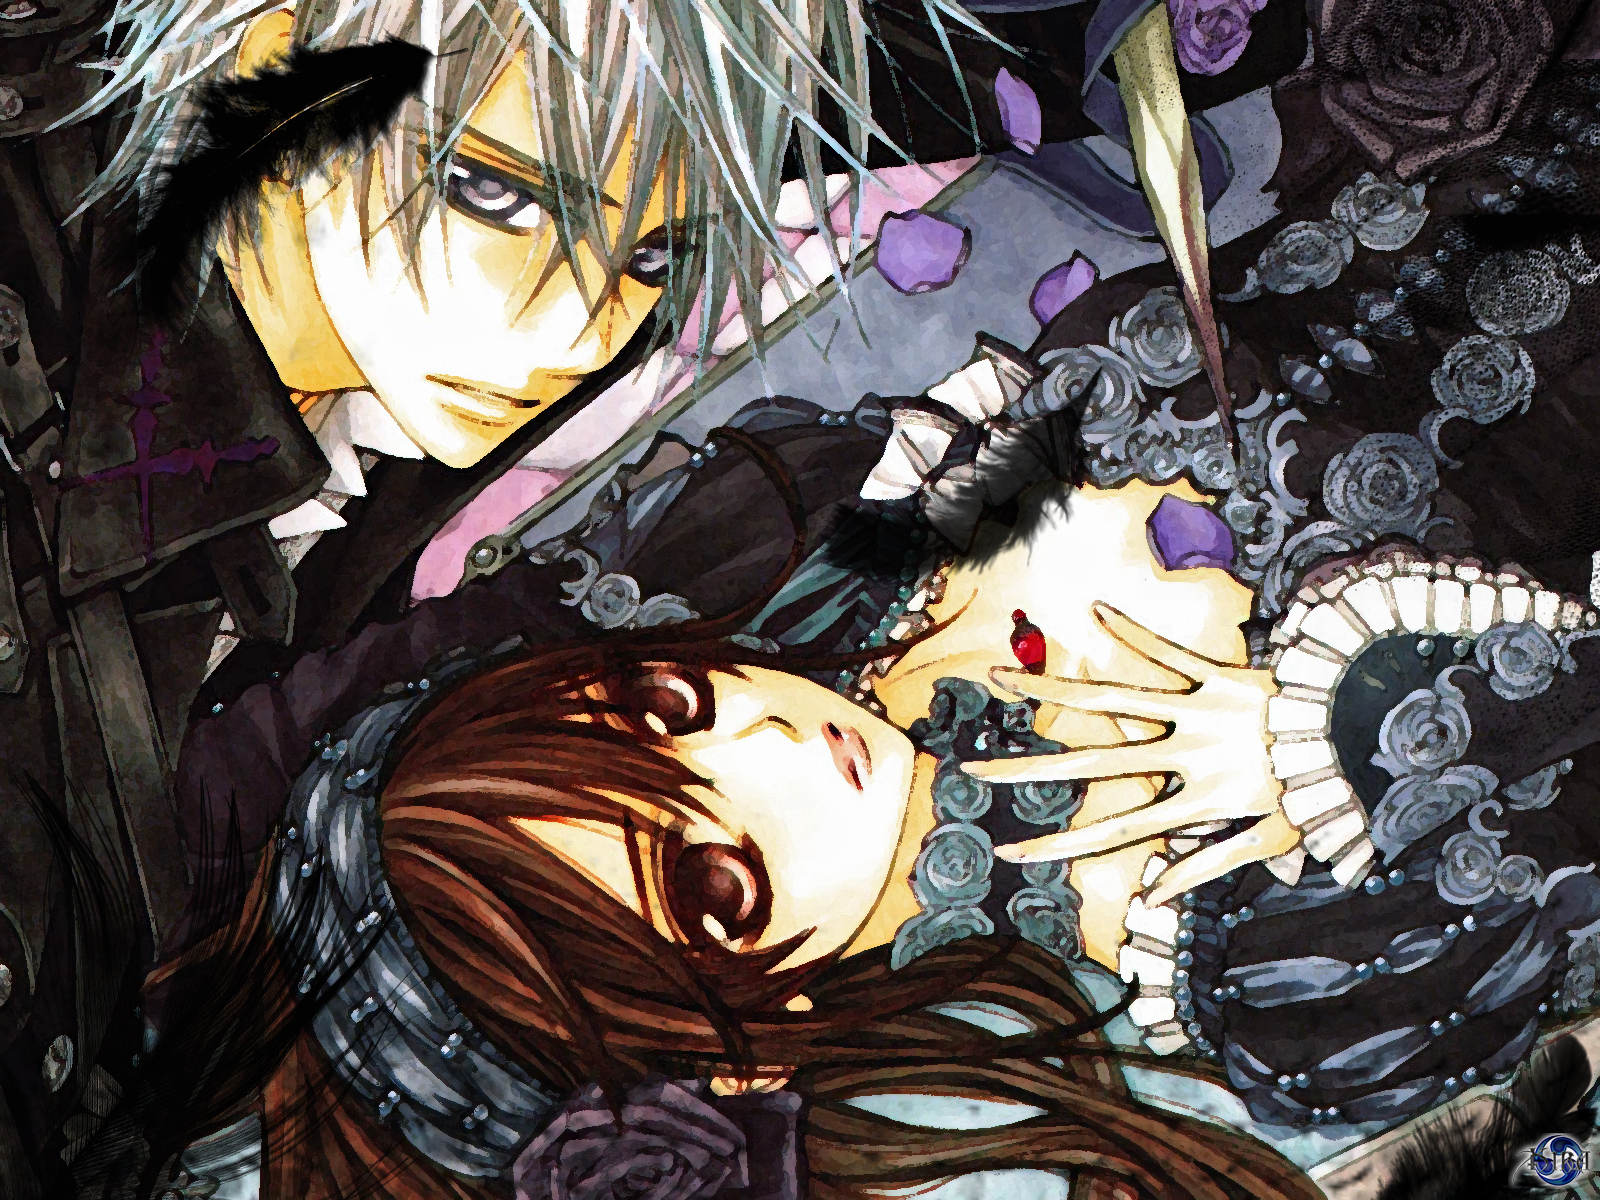 Vampire Knight Image HD Wallpaper And Background